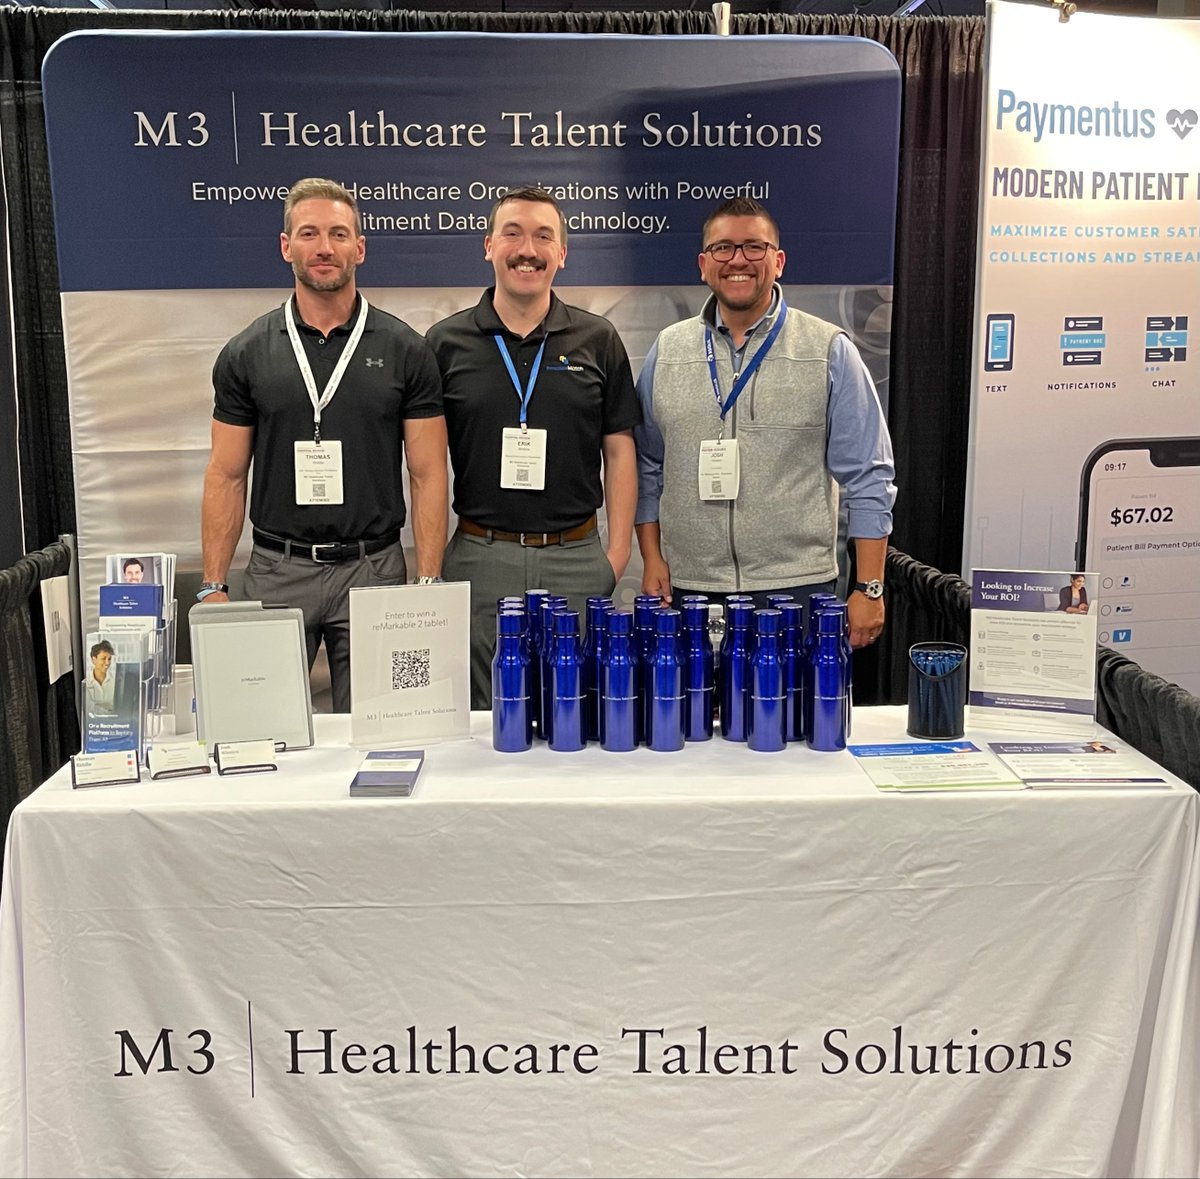 Be sure to stop by the M3 Healthcare Talent Solutions booth (#205) at Becker's Annual Hospital Meeting to learn how we can help simplify your recruitment!

#physicianrecruiter #physicianrecruiting #beckershealthcare #BeckersAnnualMeeting